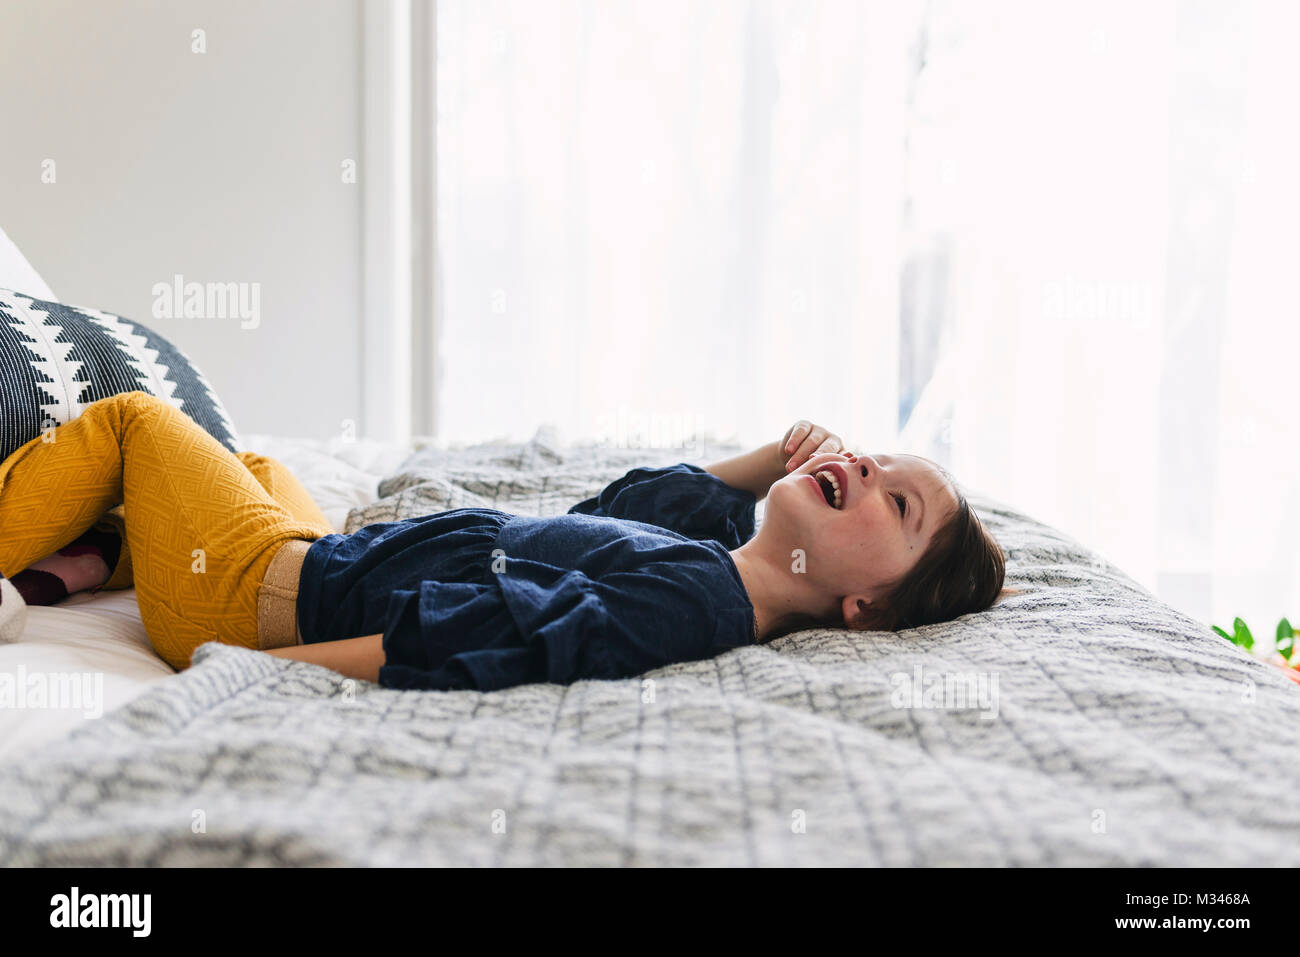 Girl lying on her bed laughing Stock Photo